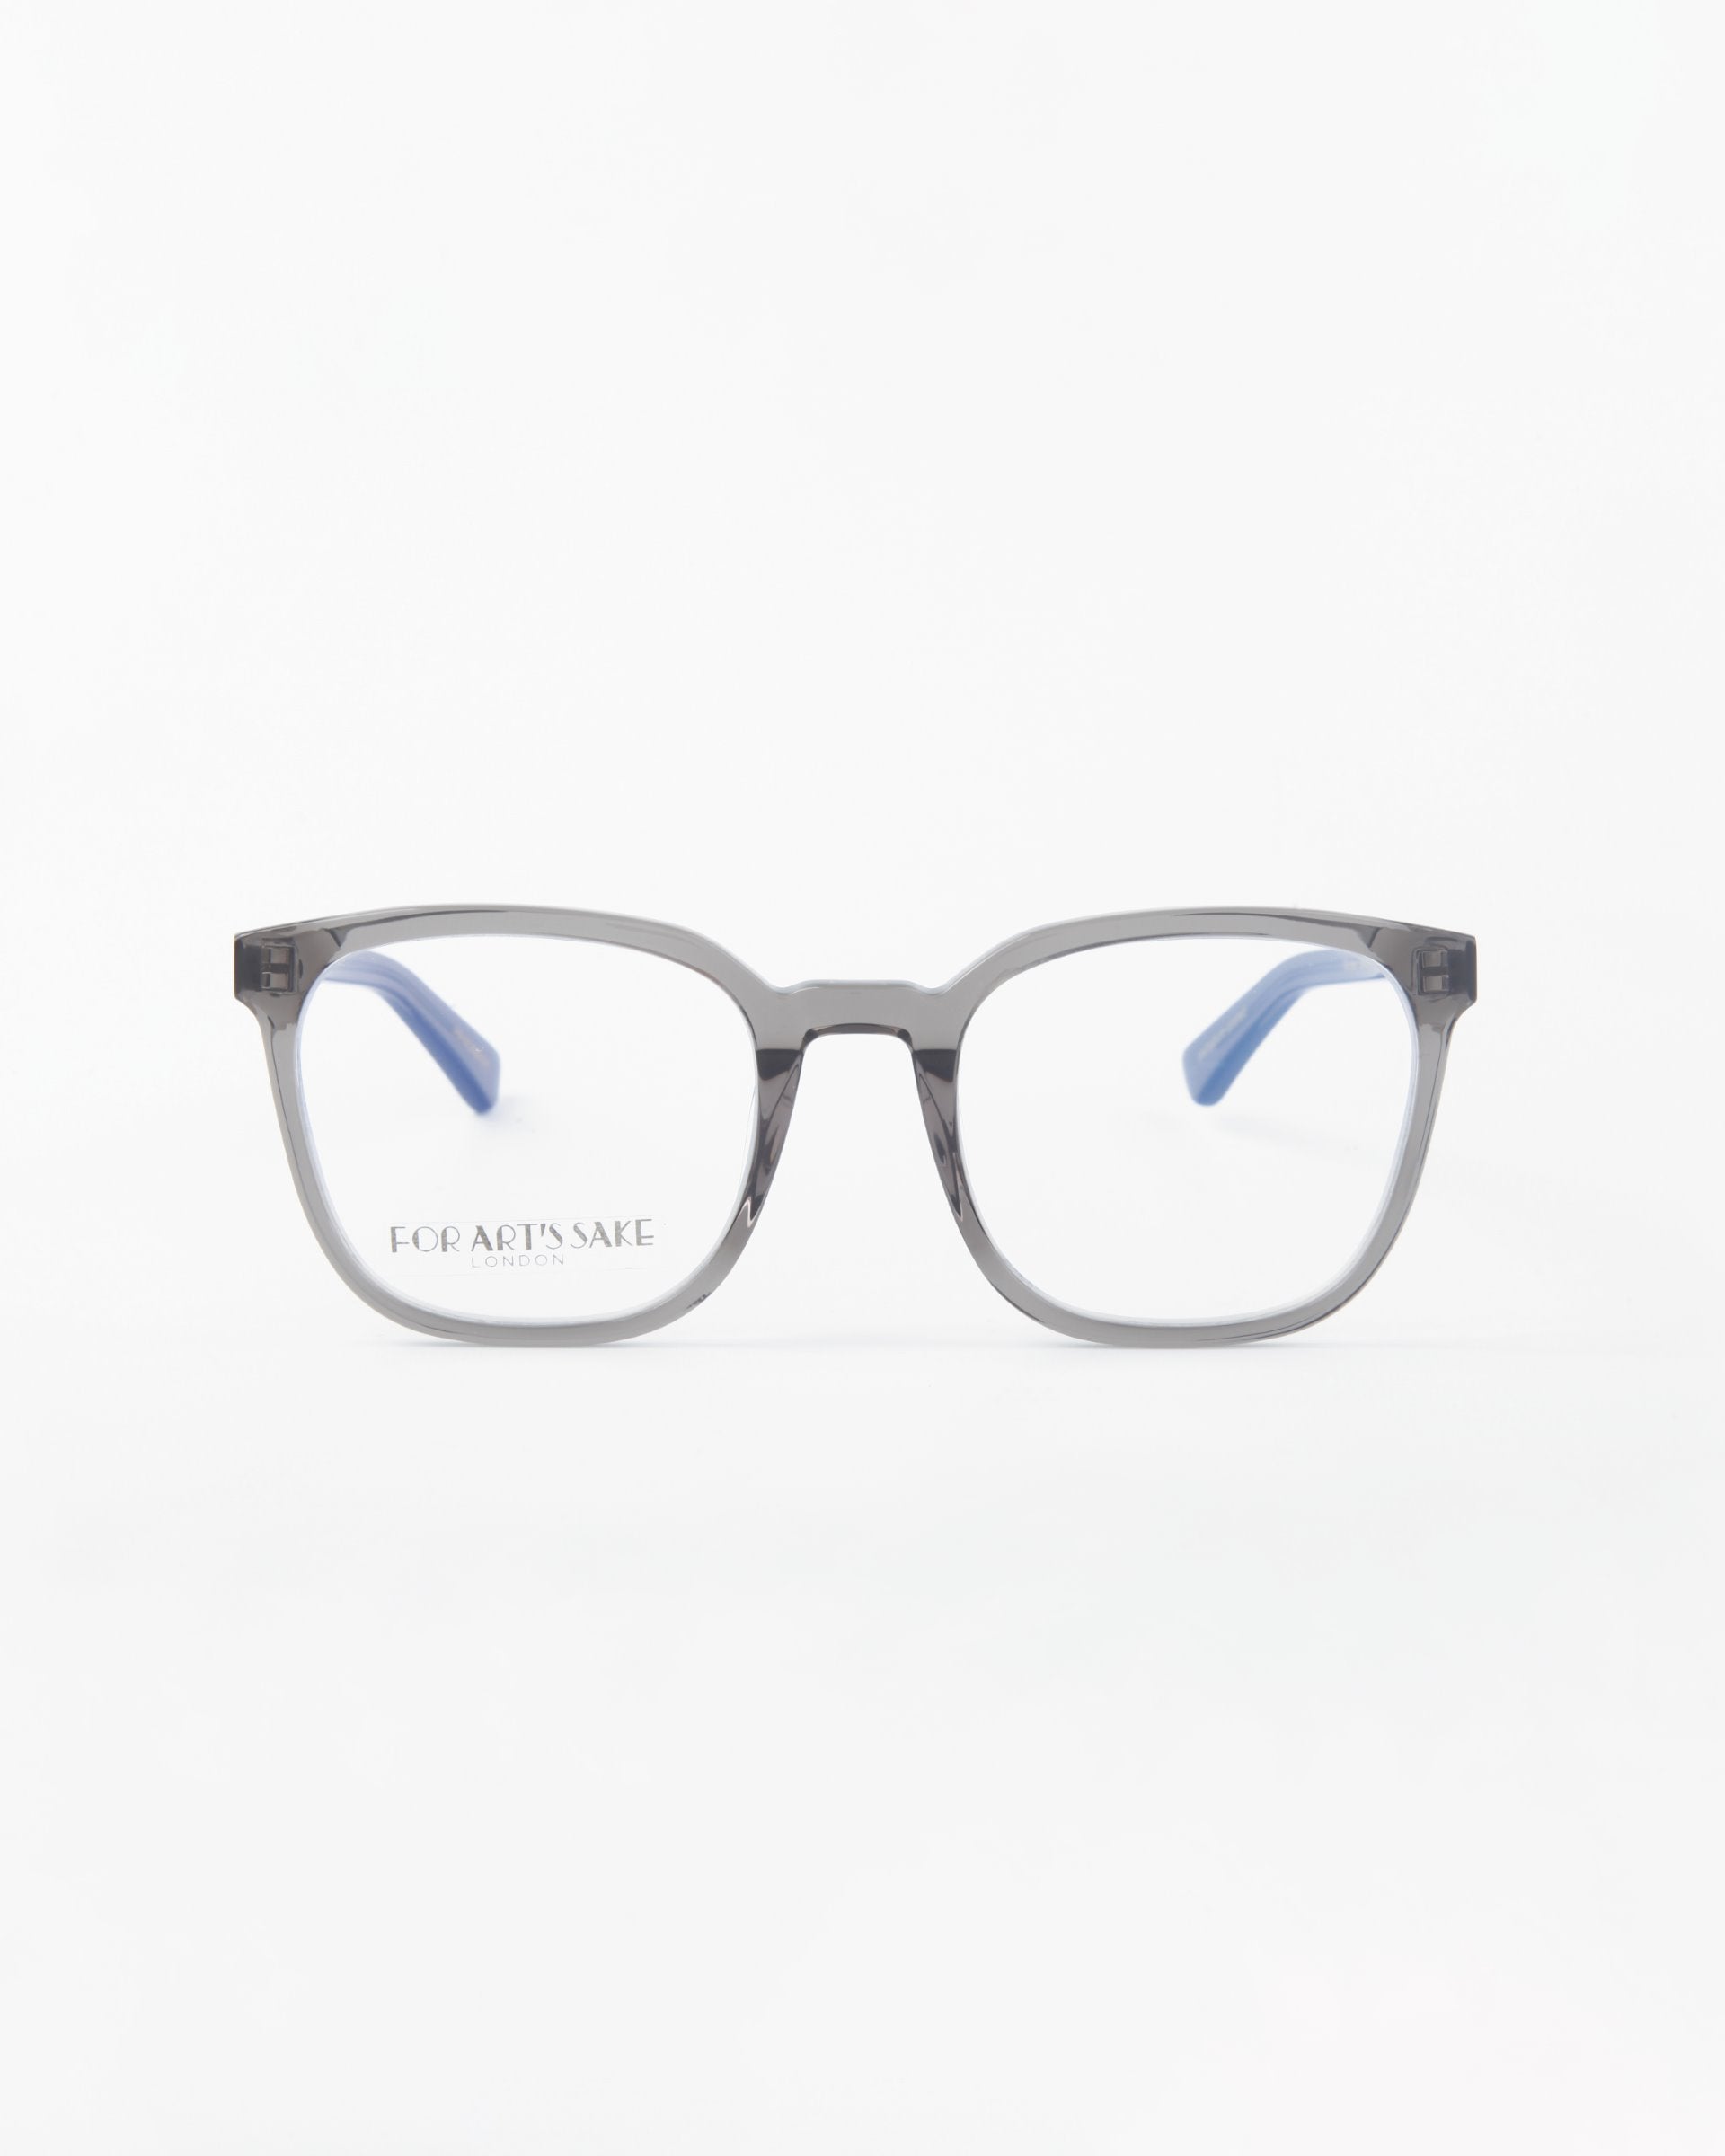 A pair of rectangular eyeglasses with transparent gray frames and light blue temple tips, placed on a white background. Made from plant-based acetate, the product name "Molten" and brand name "For Art's Sake®" are printed on the left lens.